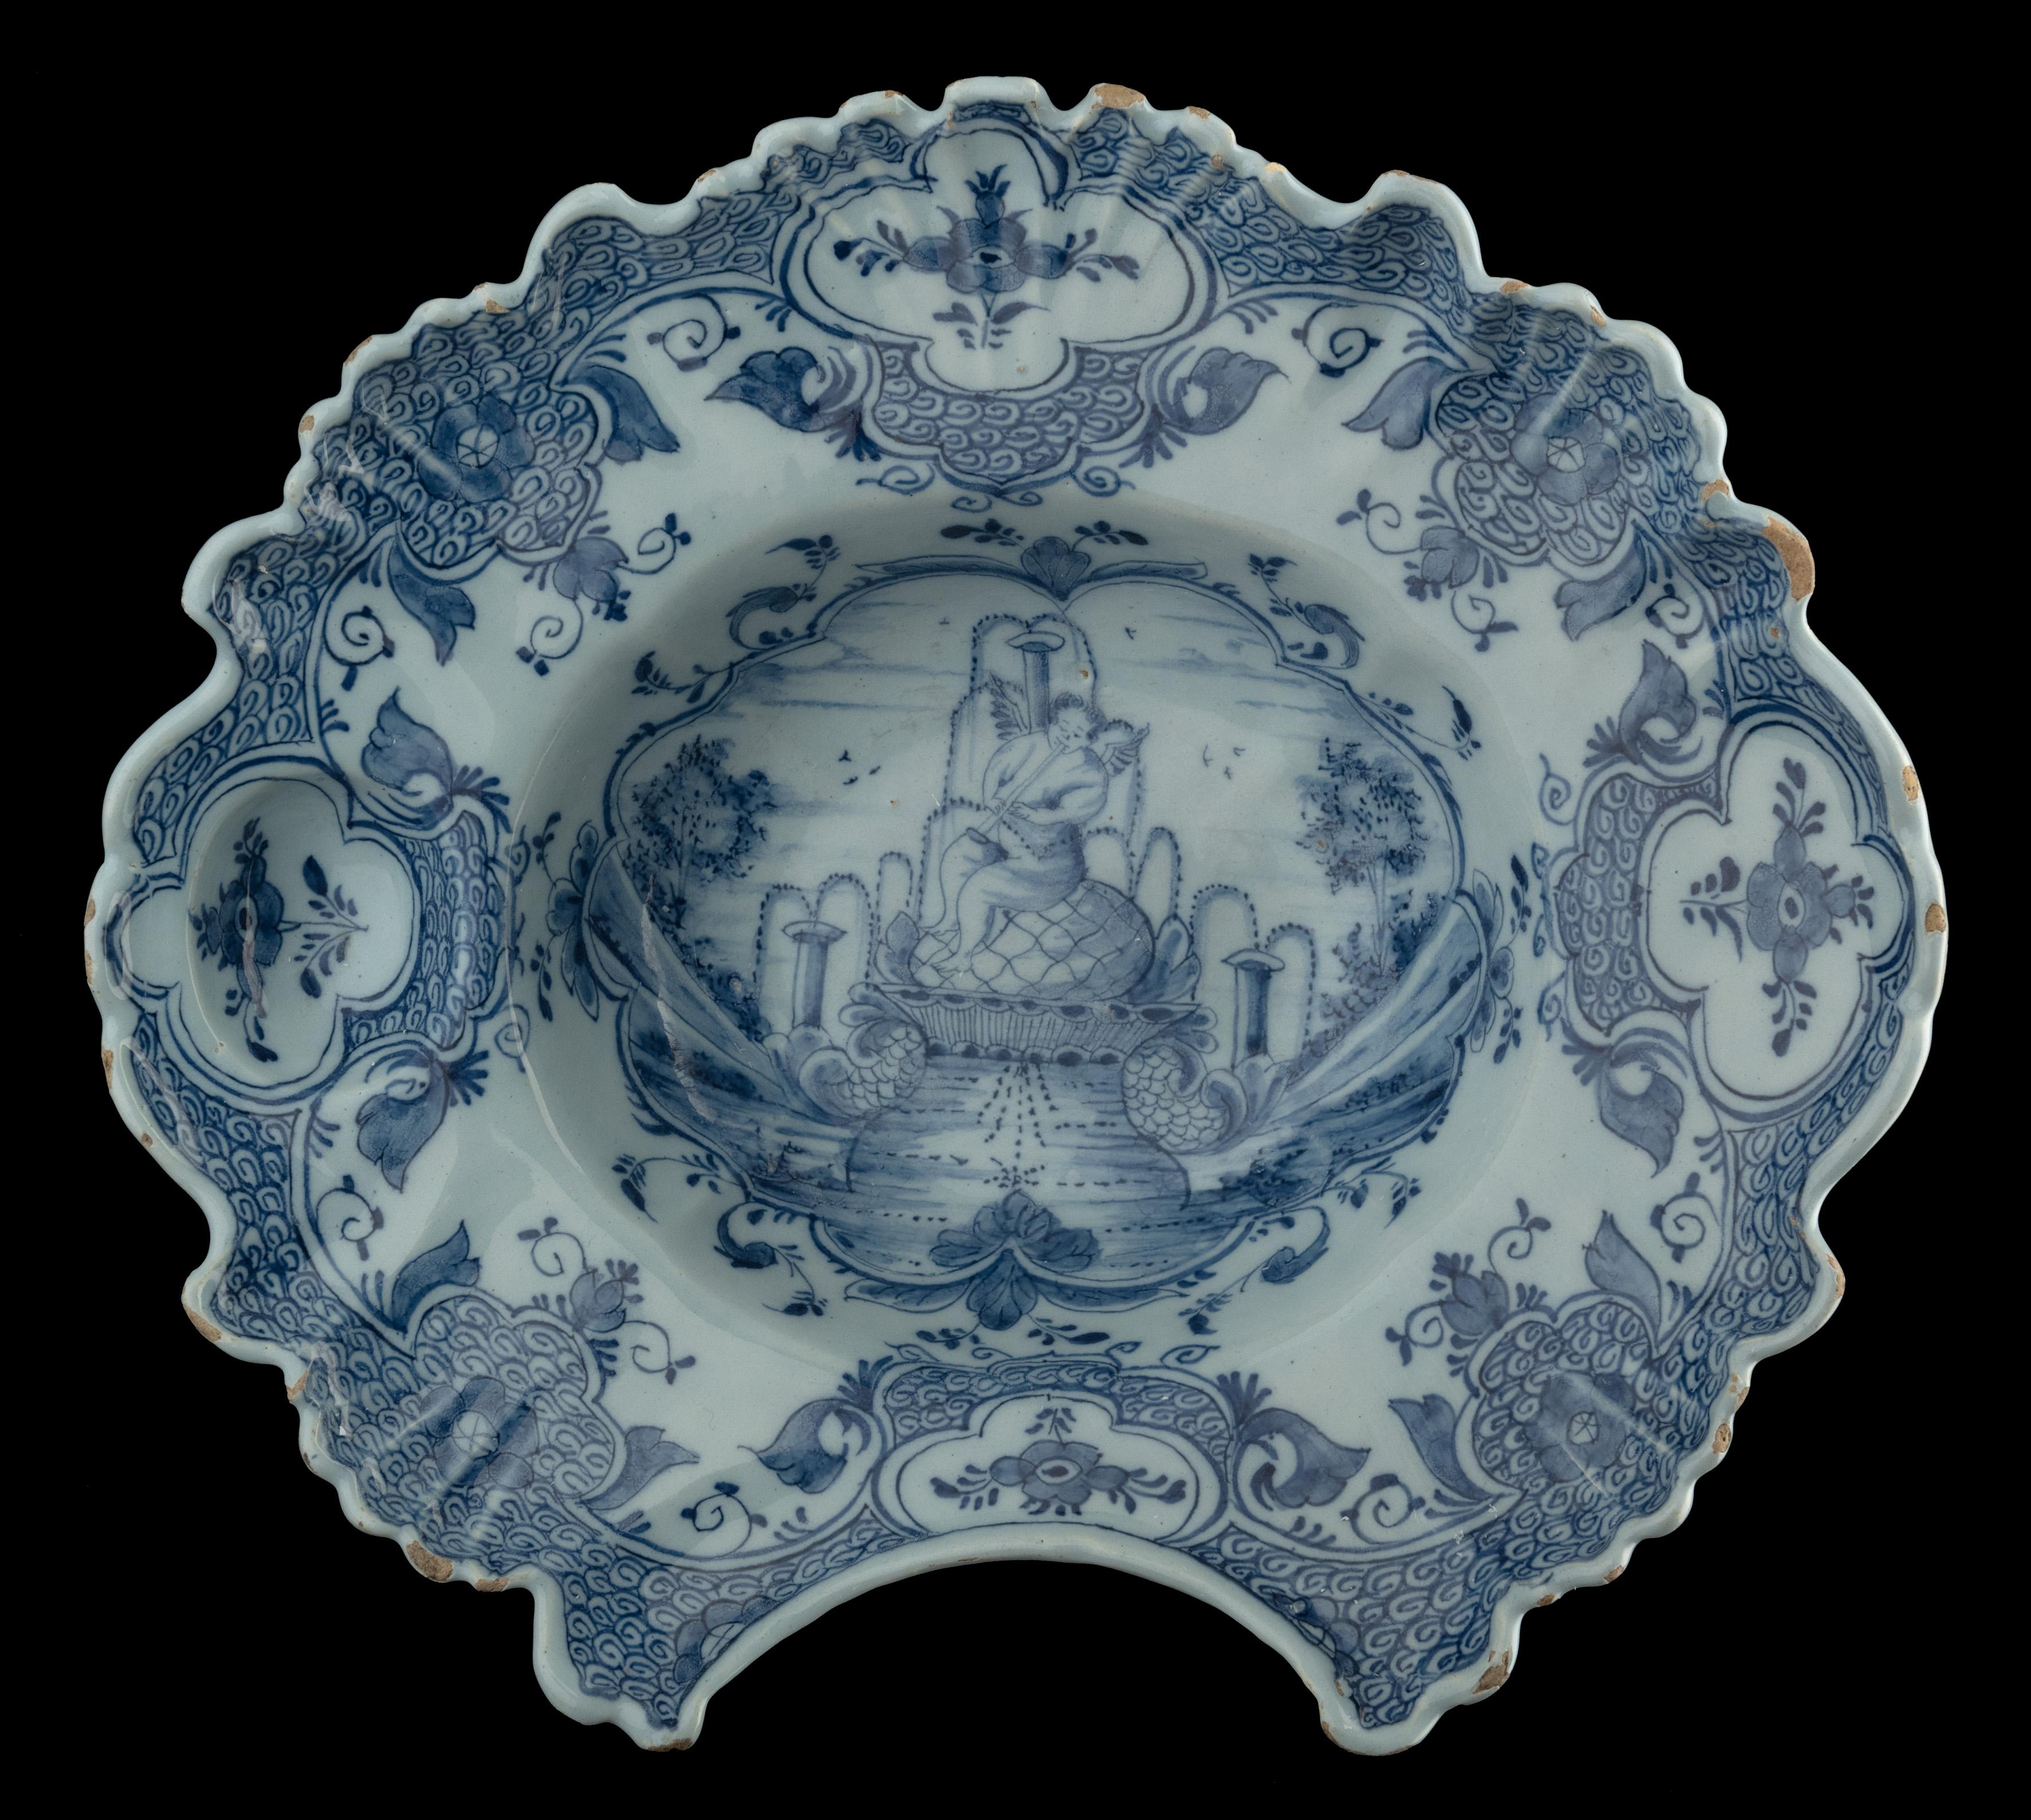 Blue and white shaving bowl with flute-playing putto on a fountain
Delft, 1759-1771 The Fortune pottery
Mark: WVDB, period of widow Elling-Van den Briel (1759-1771)

The shaving bowl is essentially oval in shape with a cantilevered, profiled rim. It